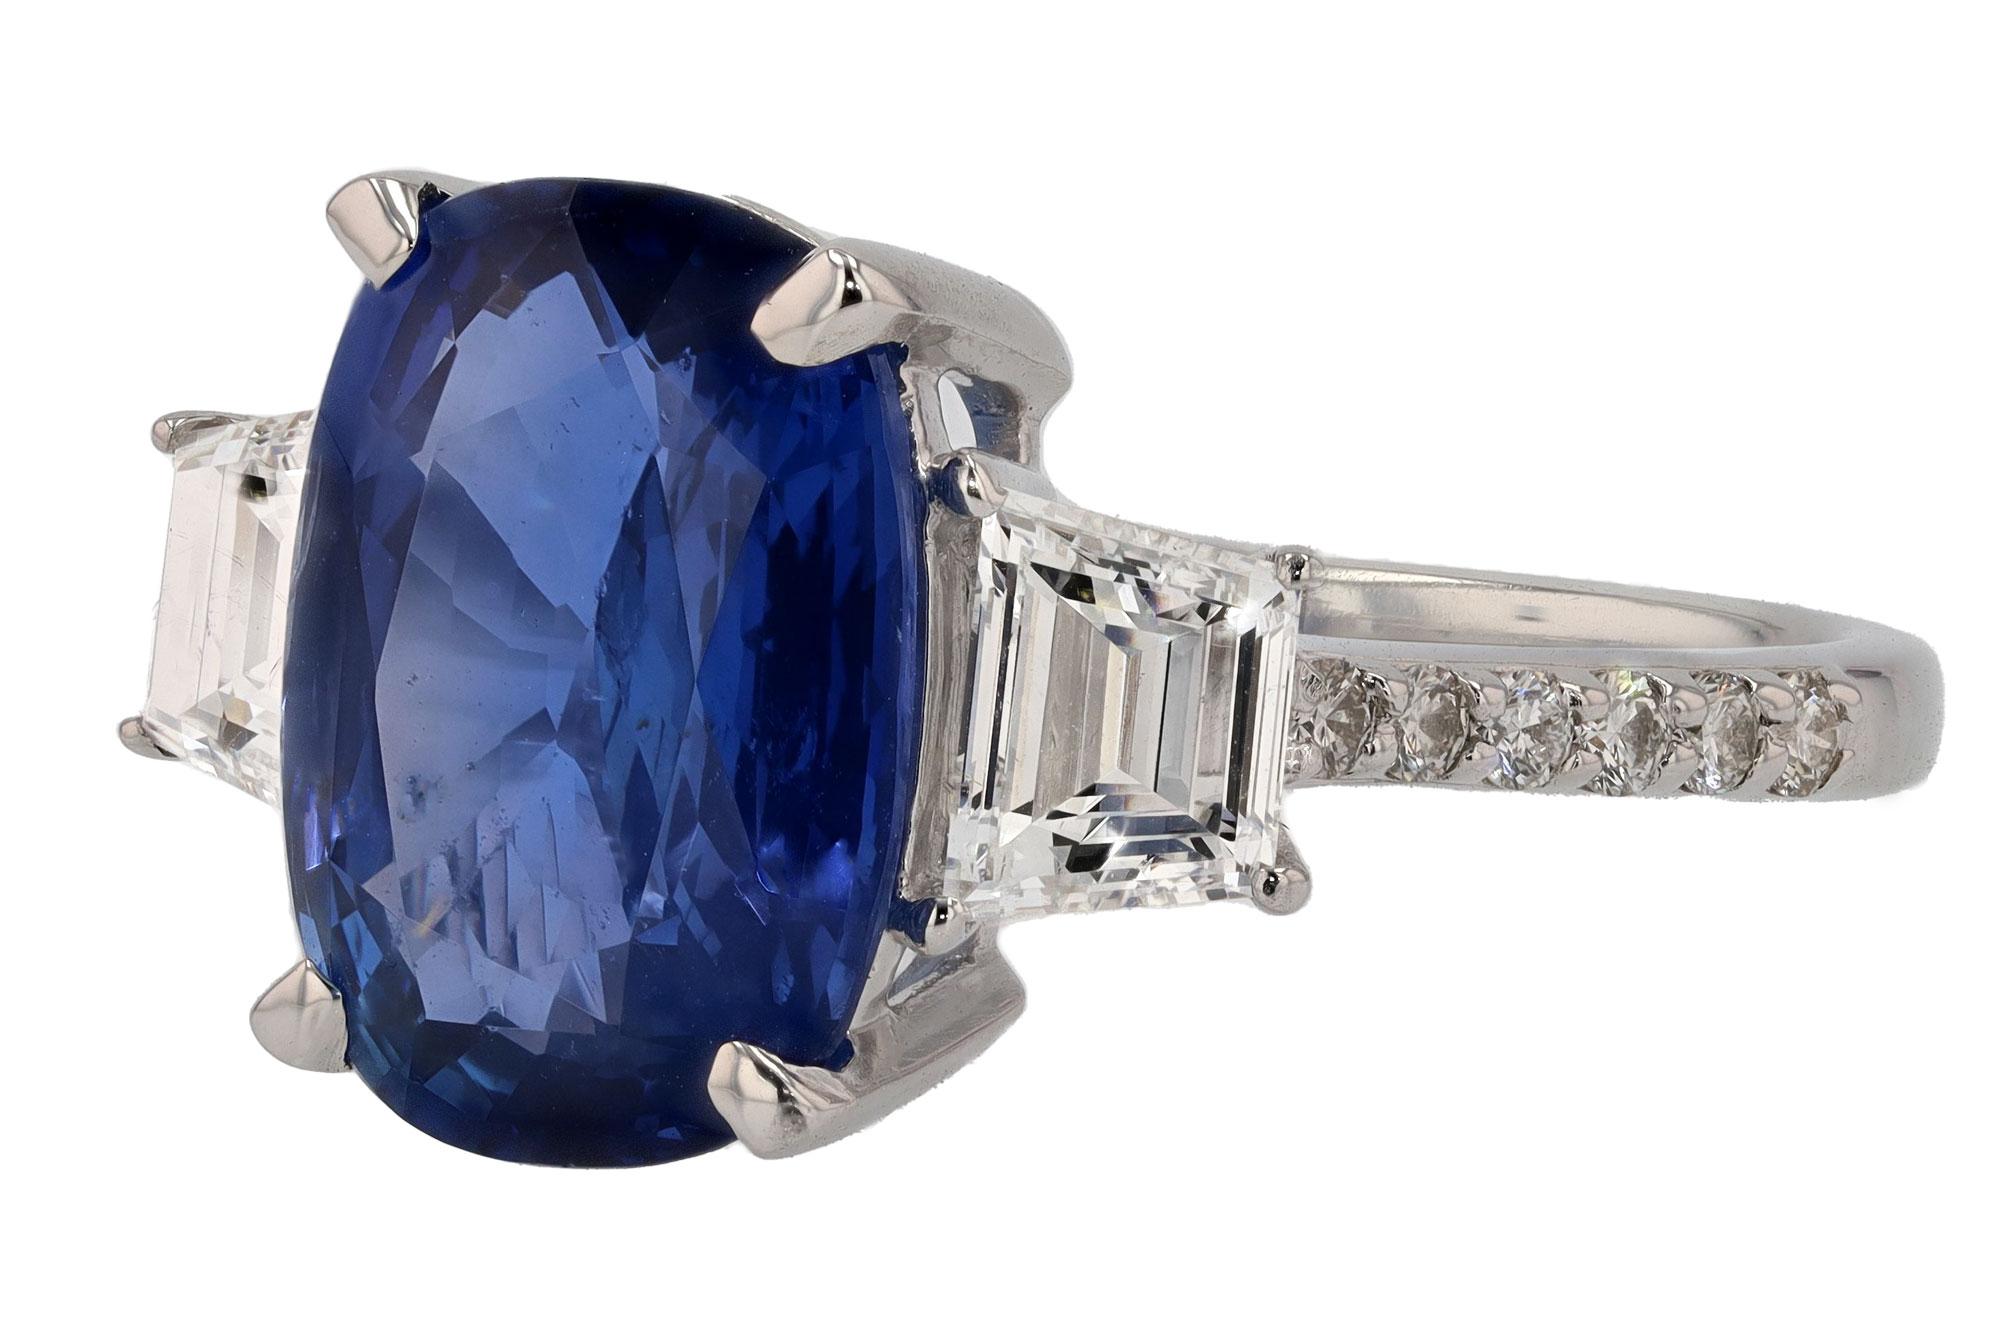 One of the most beautifully hued sapphires to grace an engagement ring. The luxurious and velvety open blue color is 100% natural with no heat treatment along with Burma as the origin of this magnificent, rare 5 carat gem. Along with a certified